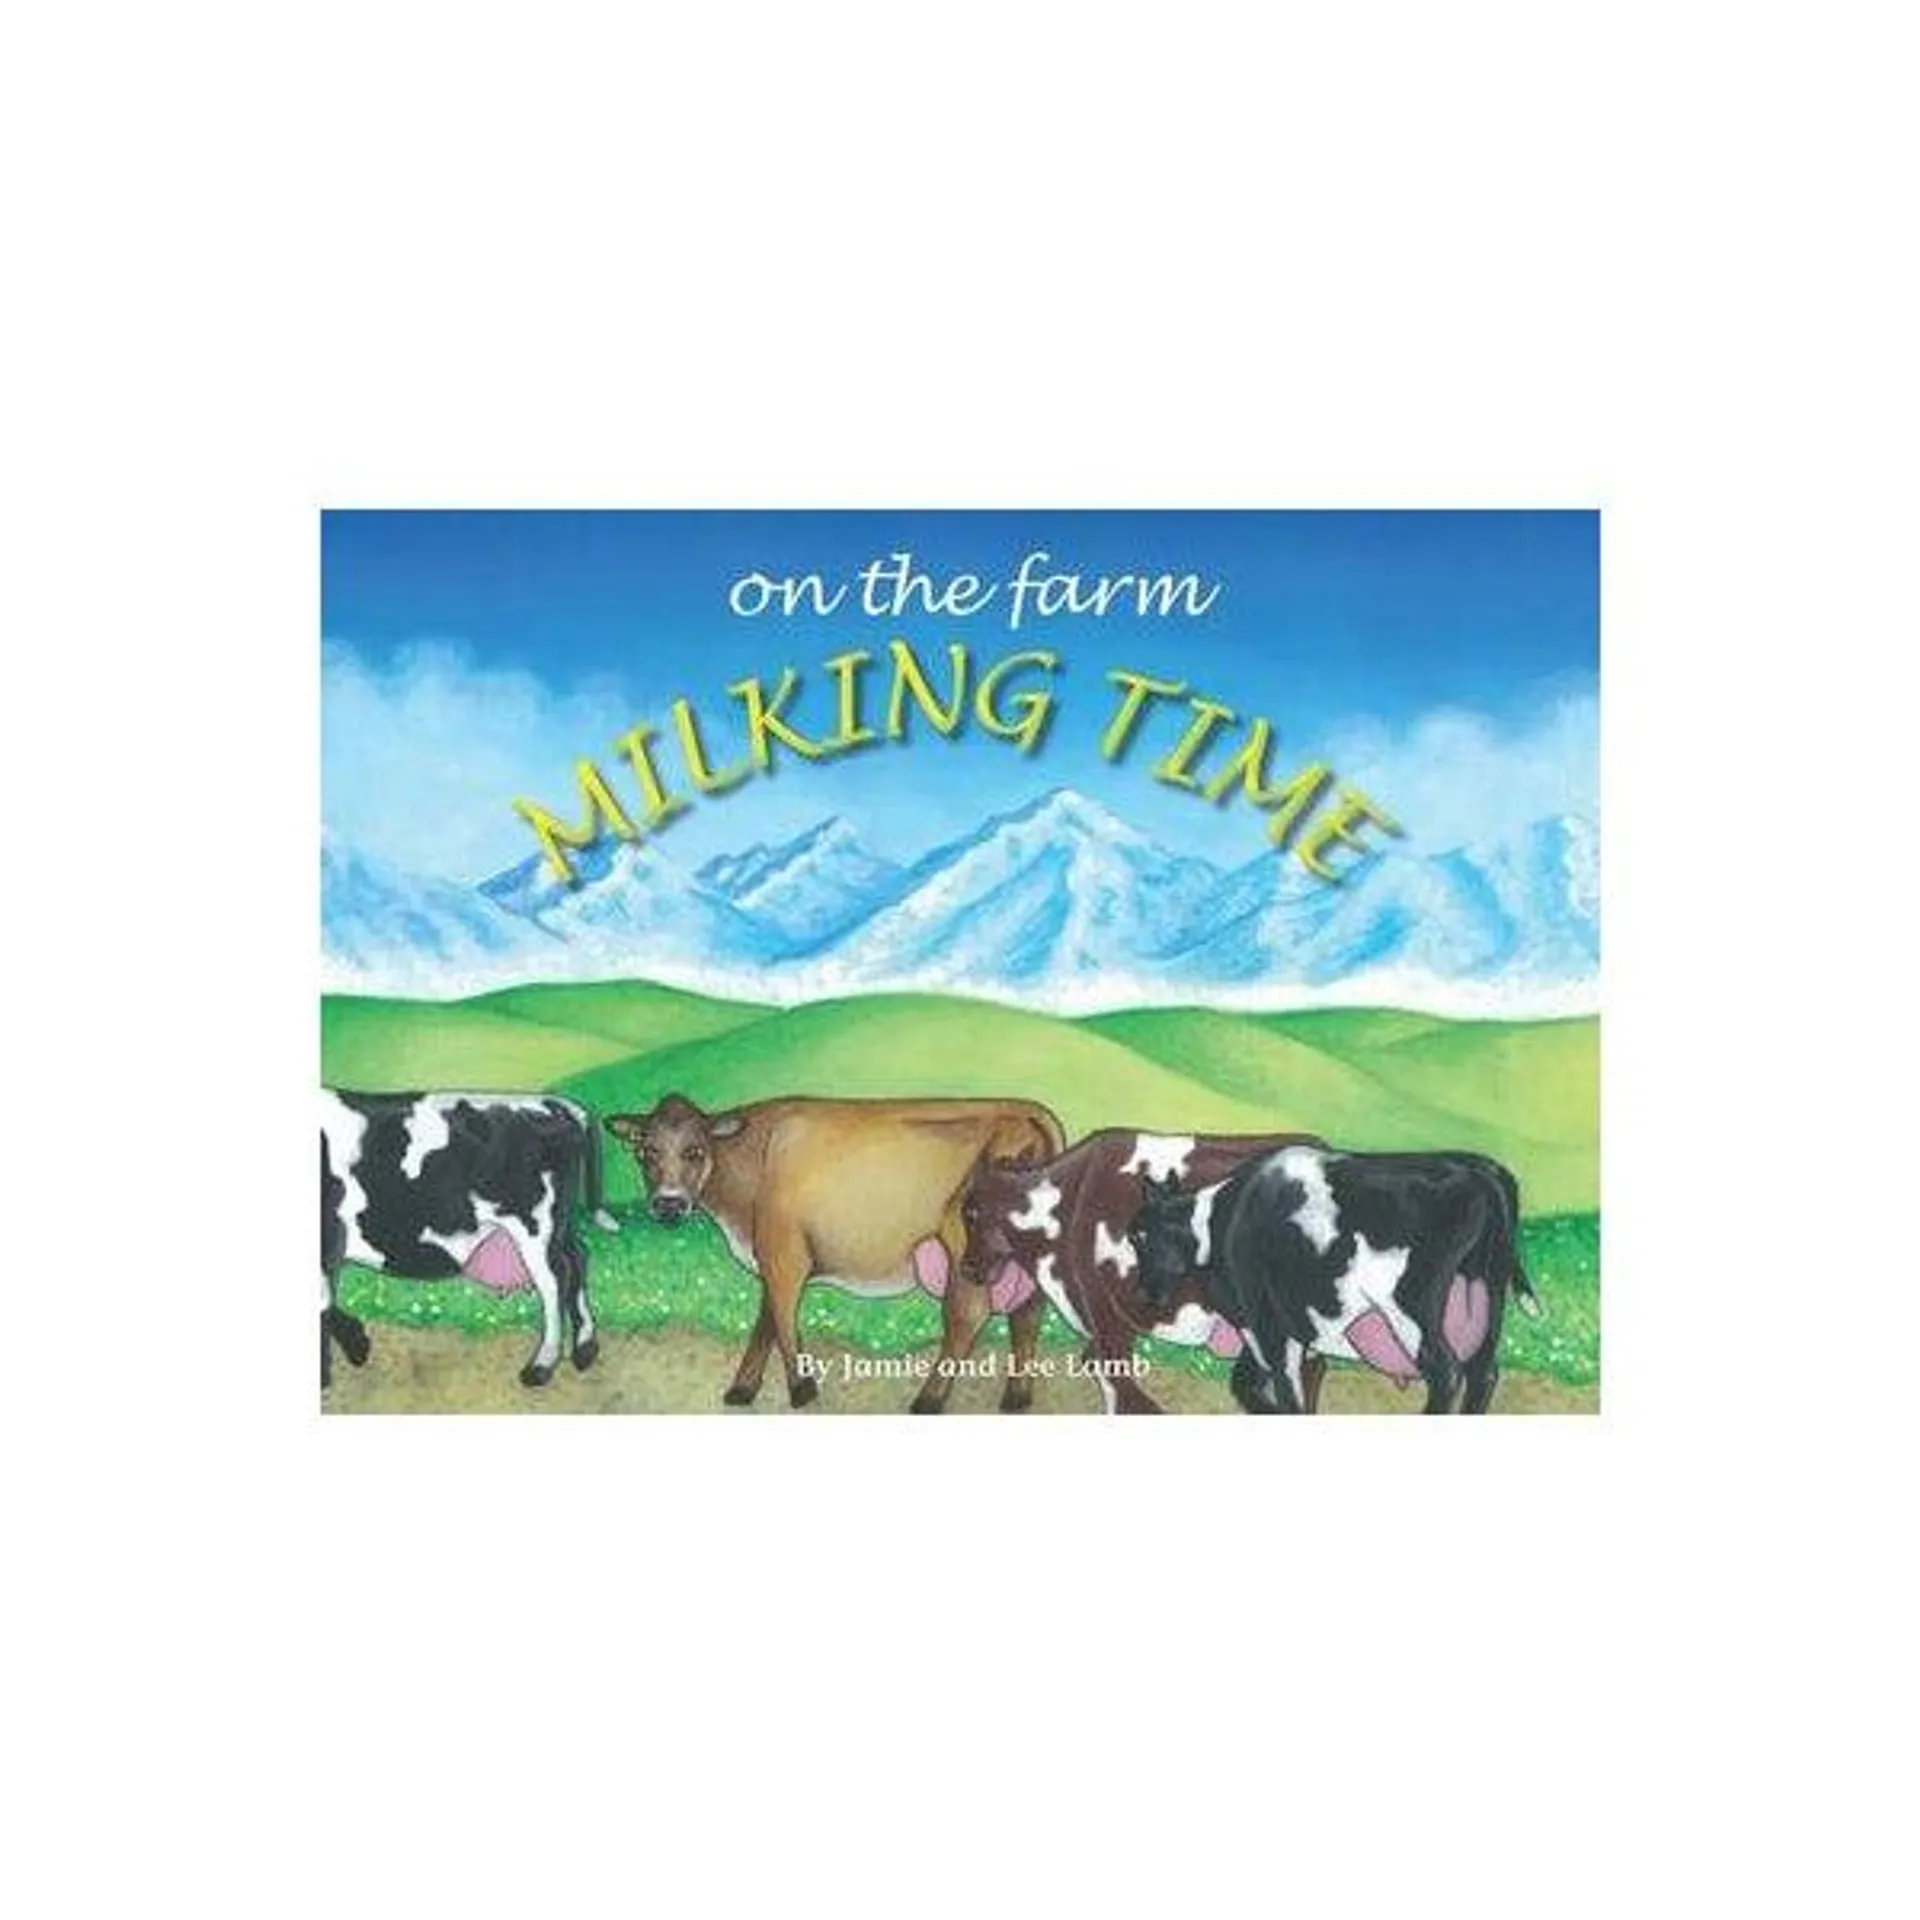 On the Farm: Milking Time Paperback